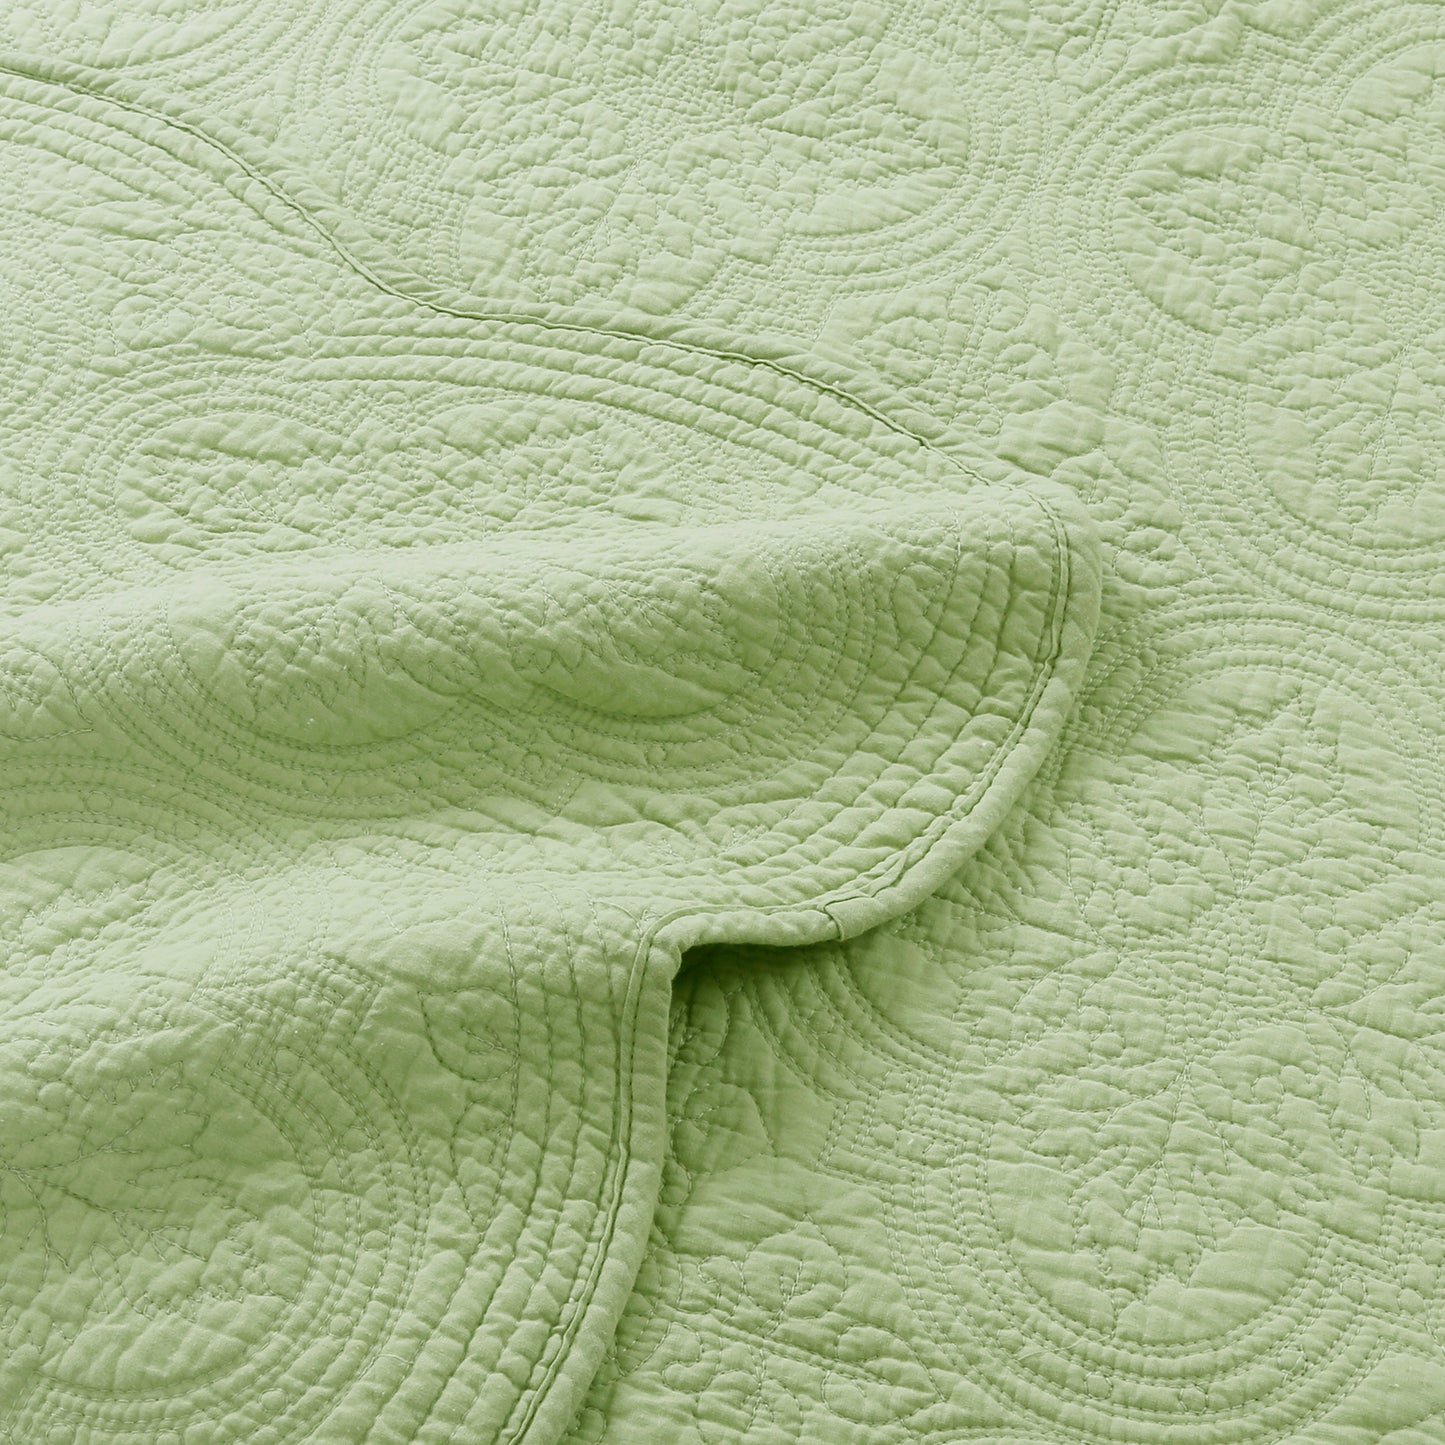 Serenity Green Victorian Scalloped Medallion Floral Pure Solid Cotton Reversible Quilt Bedding Set